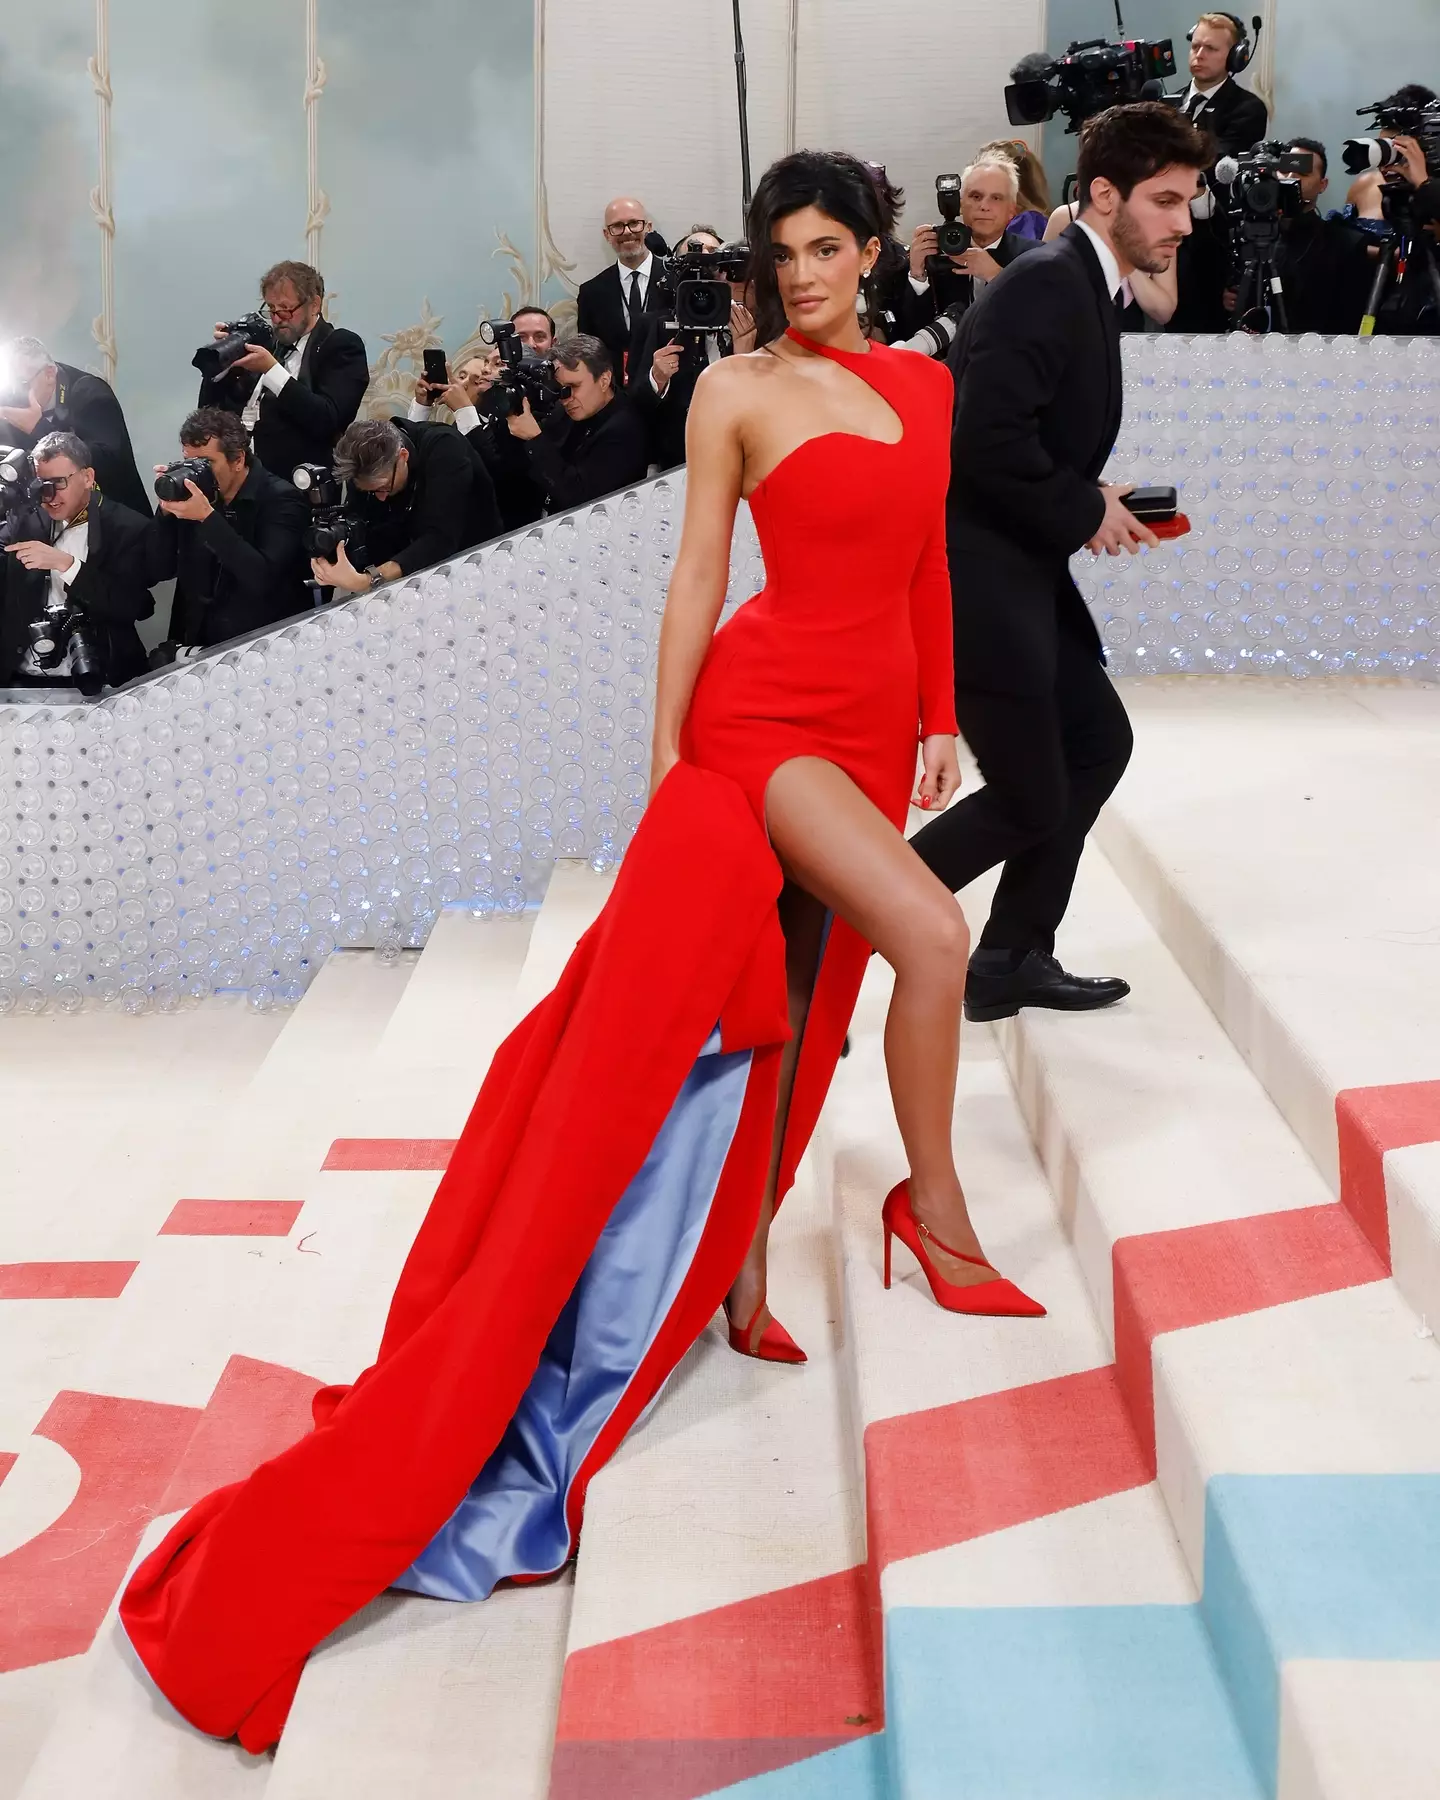 The model went viral for his appearance at the 2023 Met Gala. (Taylor Hill/Getty Images)